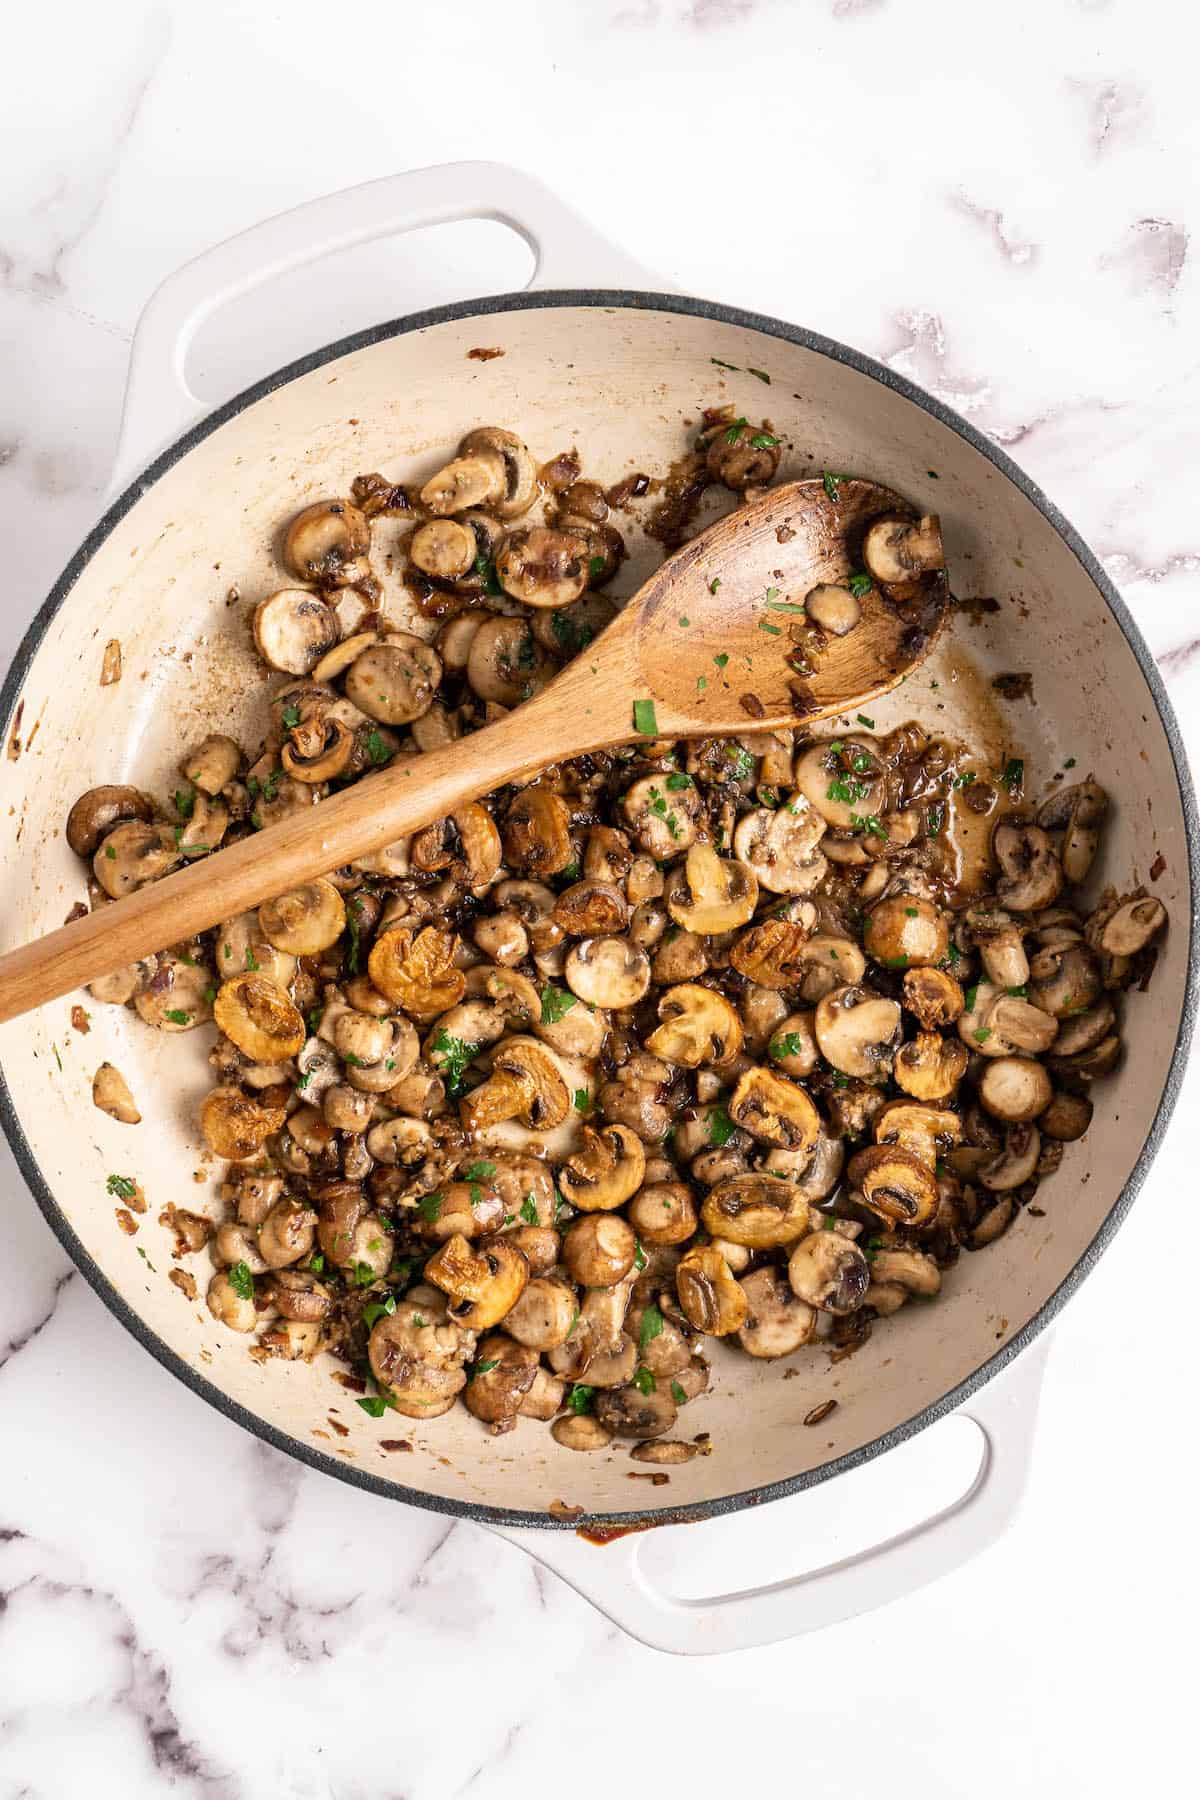 Overhead view of cooked mushrooms in pan with wooden spoon